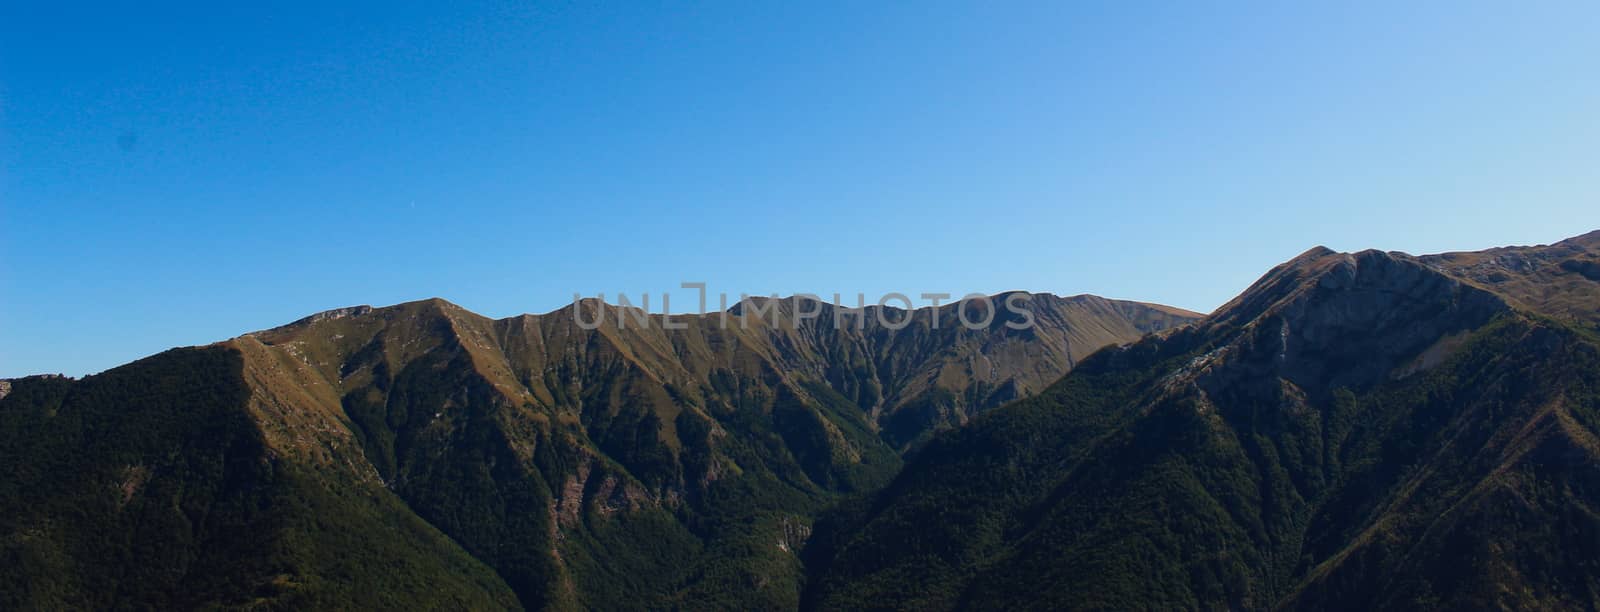 Banner of mountain peaks on Bjelasnica mountain in autumn, with cloudless blue sky in the background. Next to the old Bosnian village of Lukomir. by mahirrov